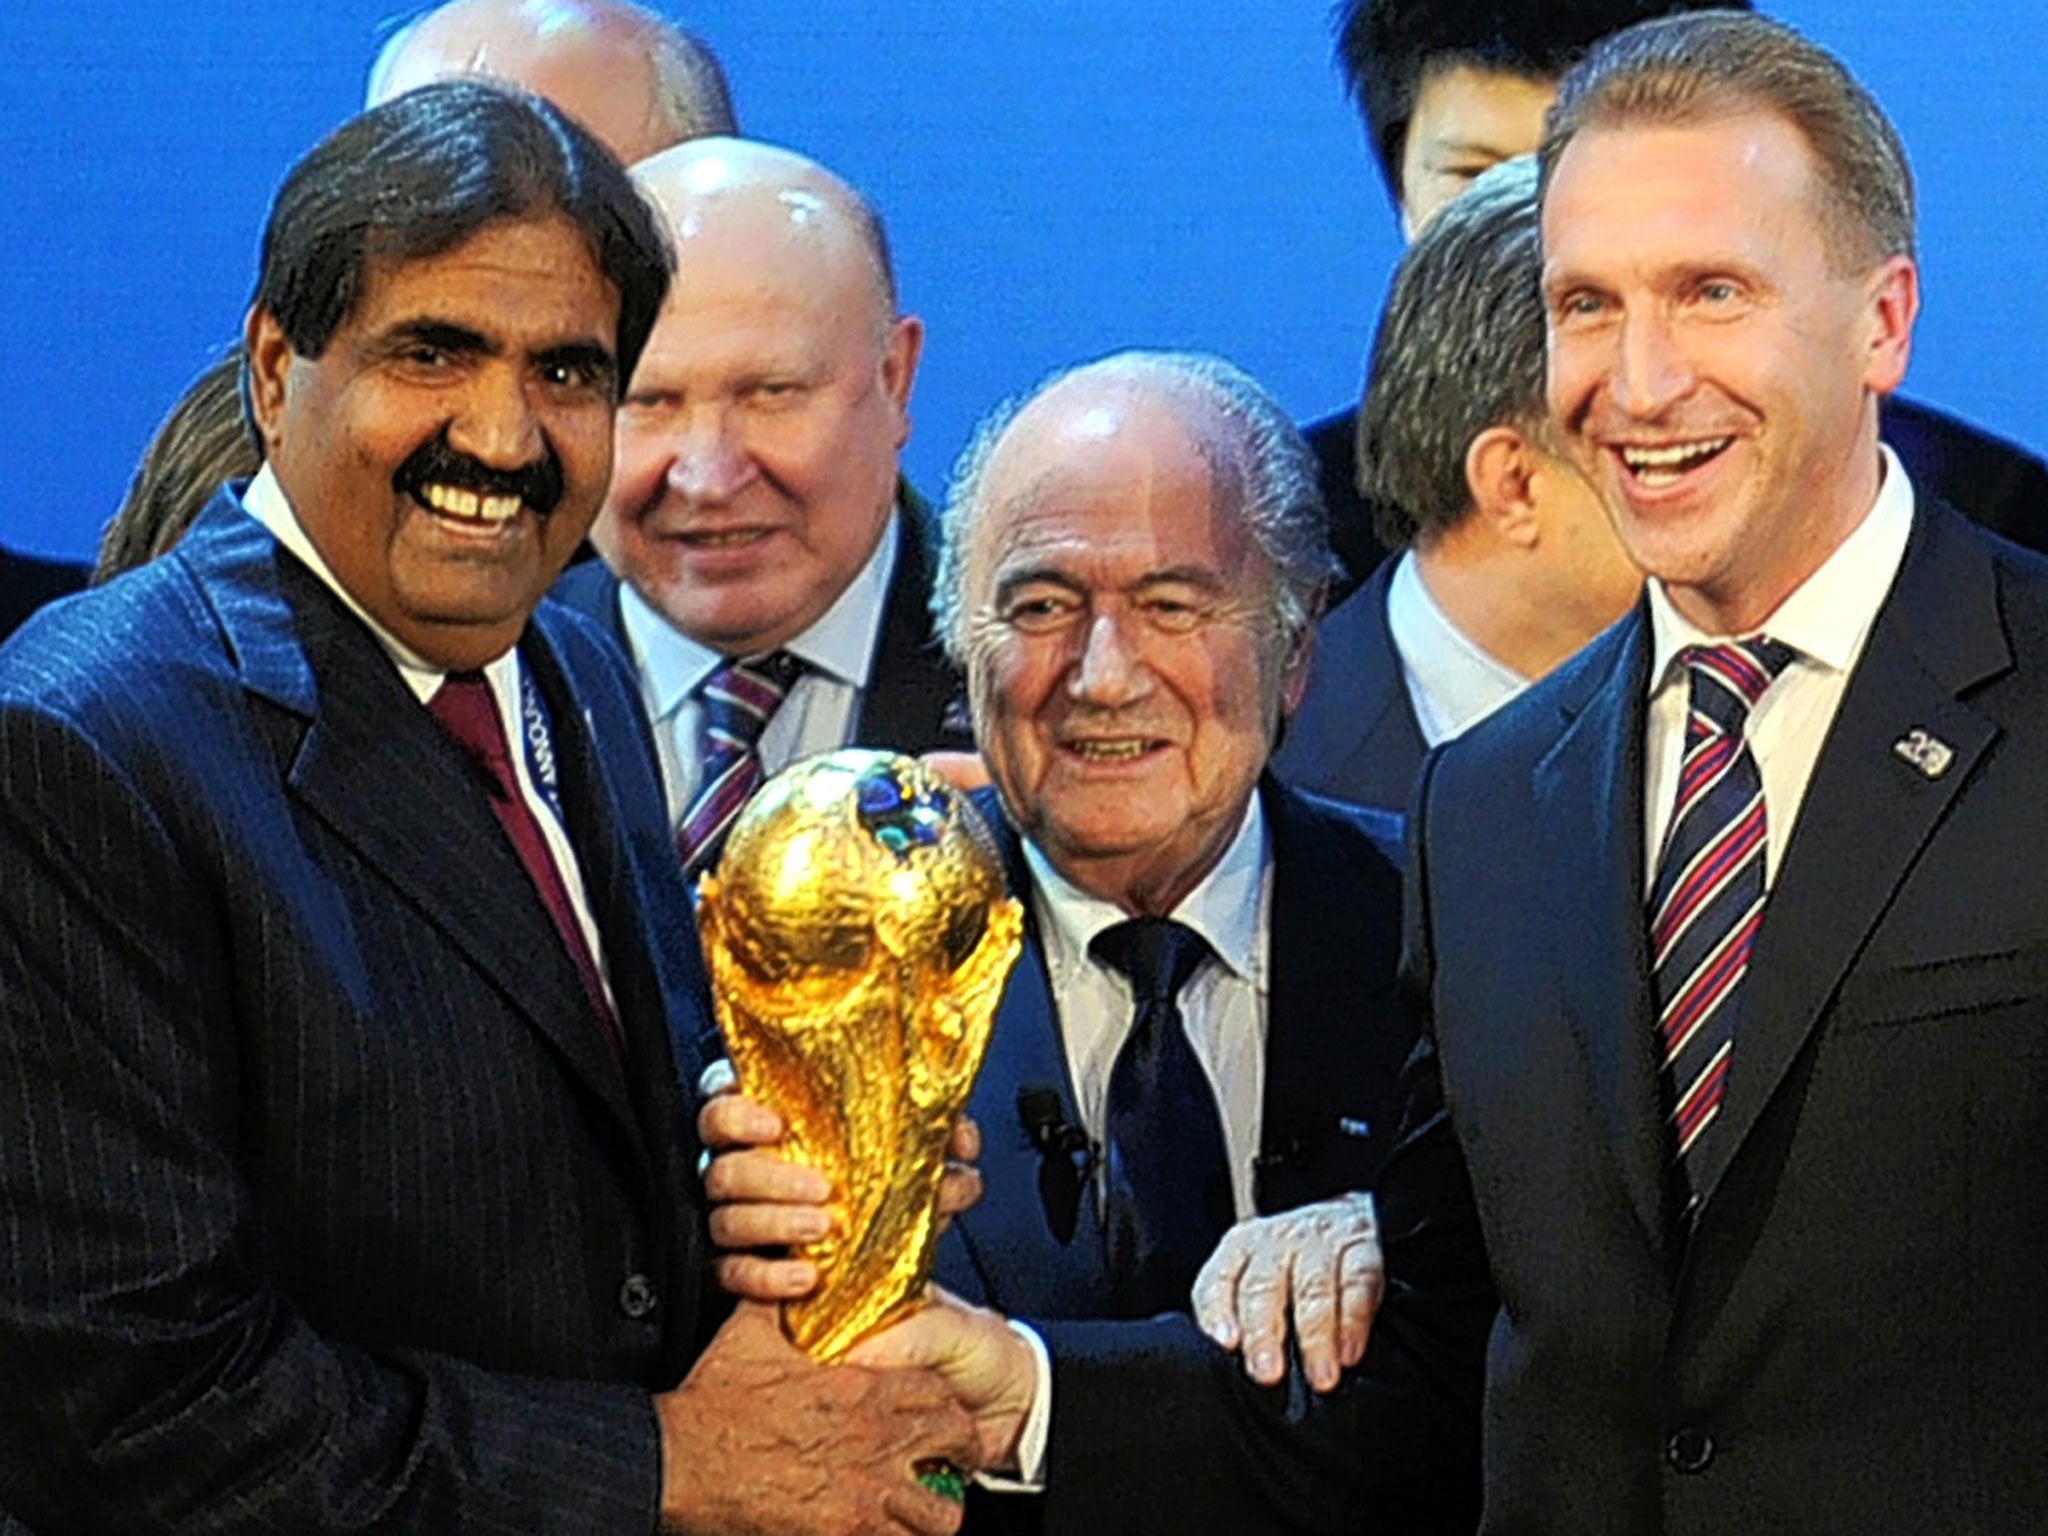 World Cup: FIFA launches criminal case over 2018 and 2022 bidding